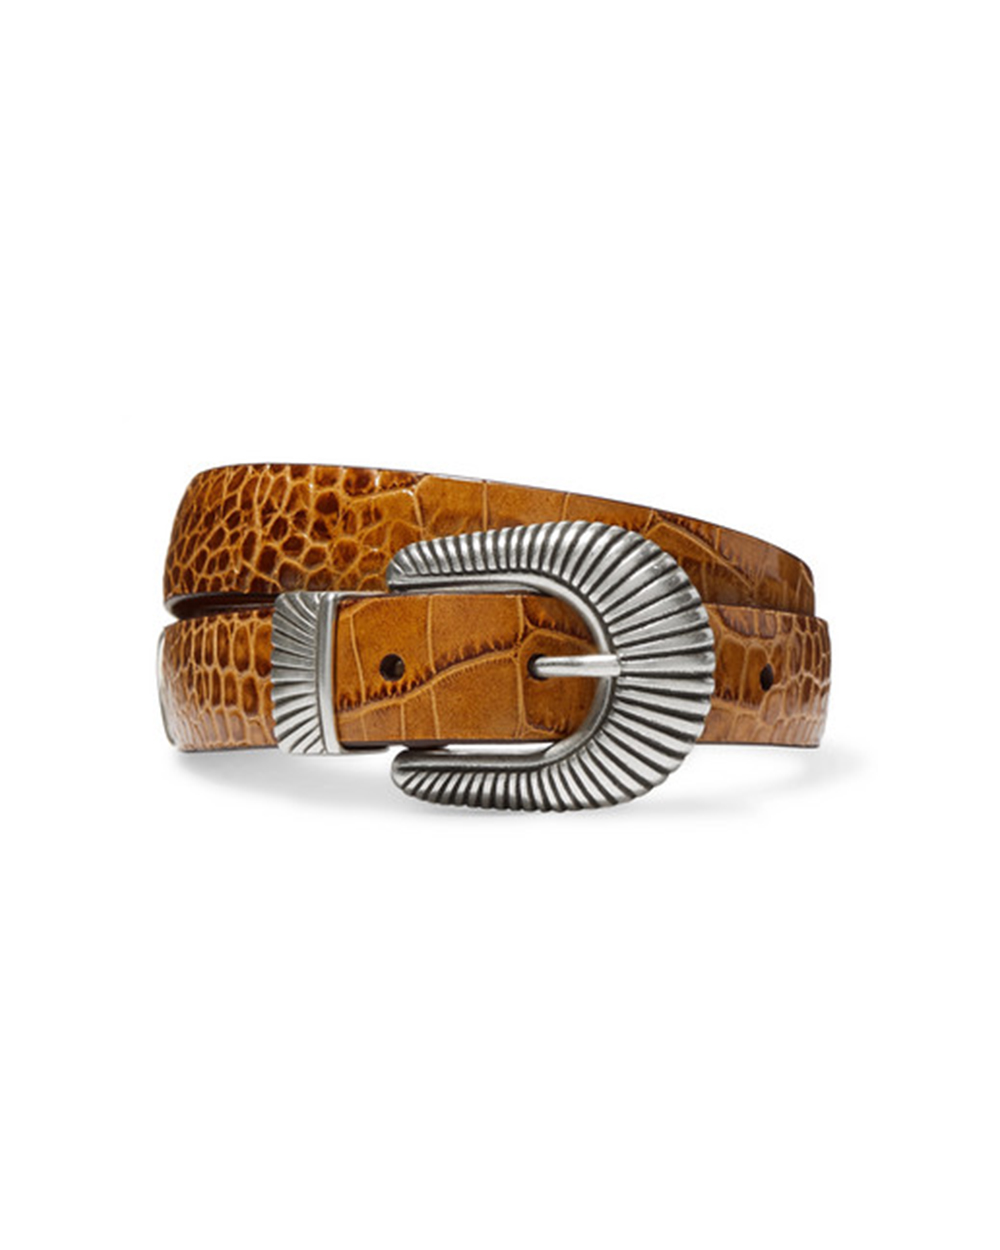 Andersons croc-effect leather belt, $140 from Net-a-Porter